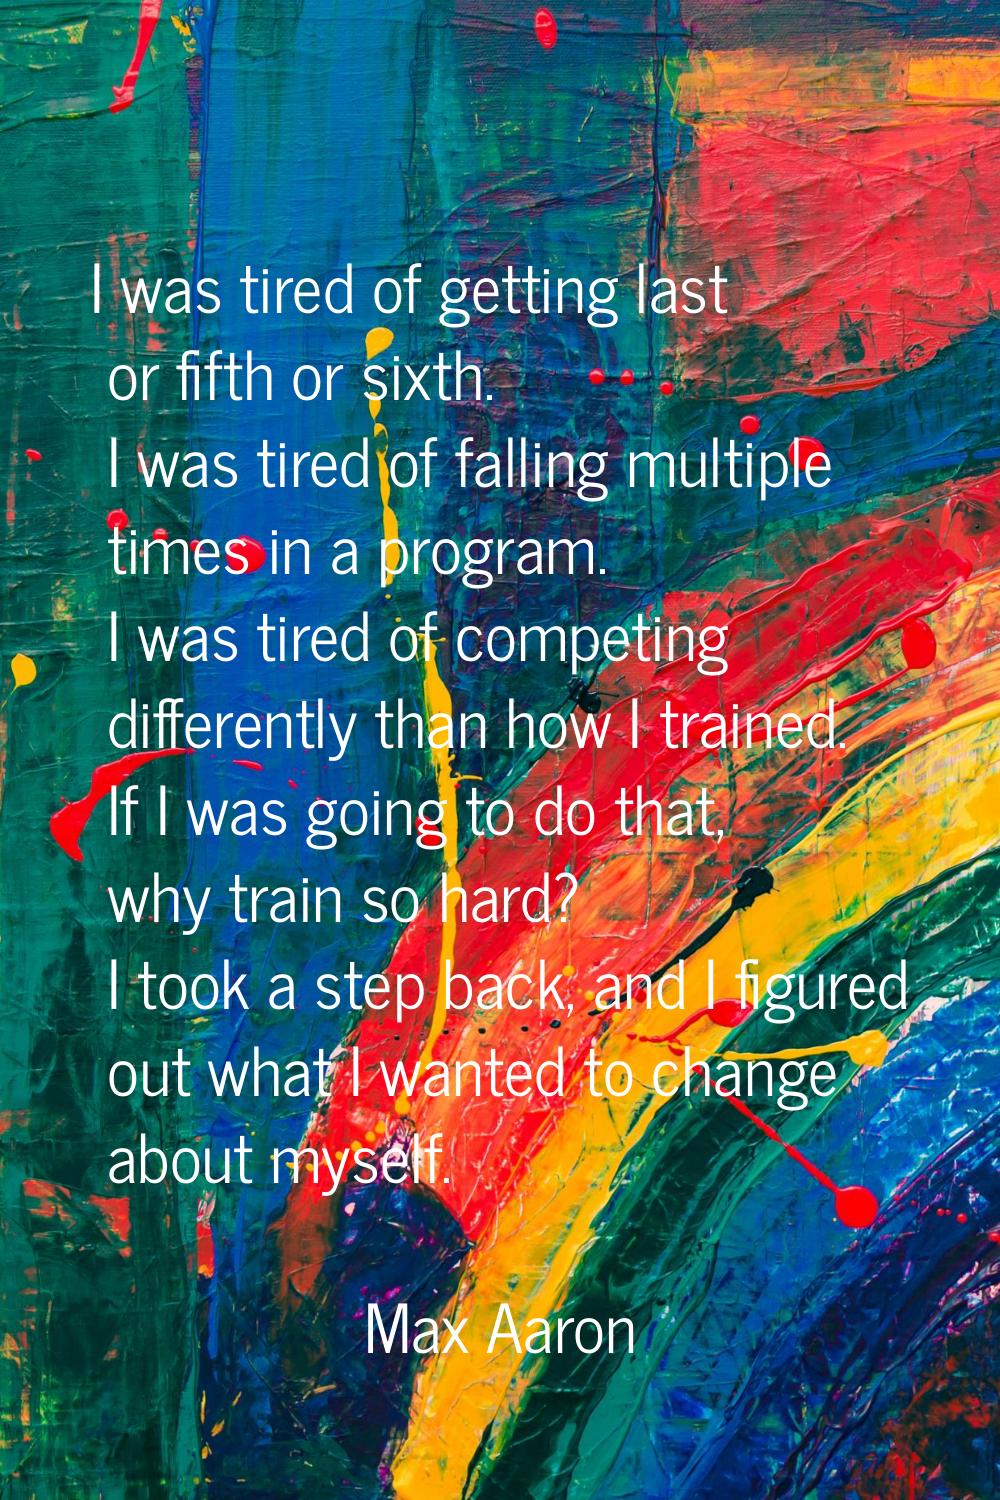 I was tired of getting last or fifth or sixth. I was tired of falling multiple times in a program. 